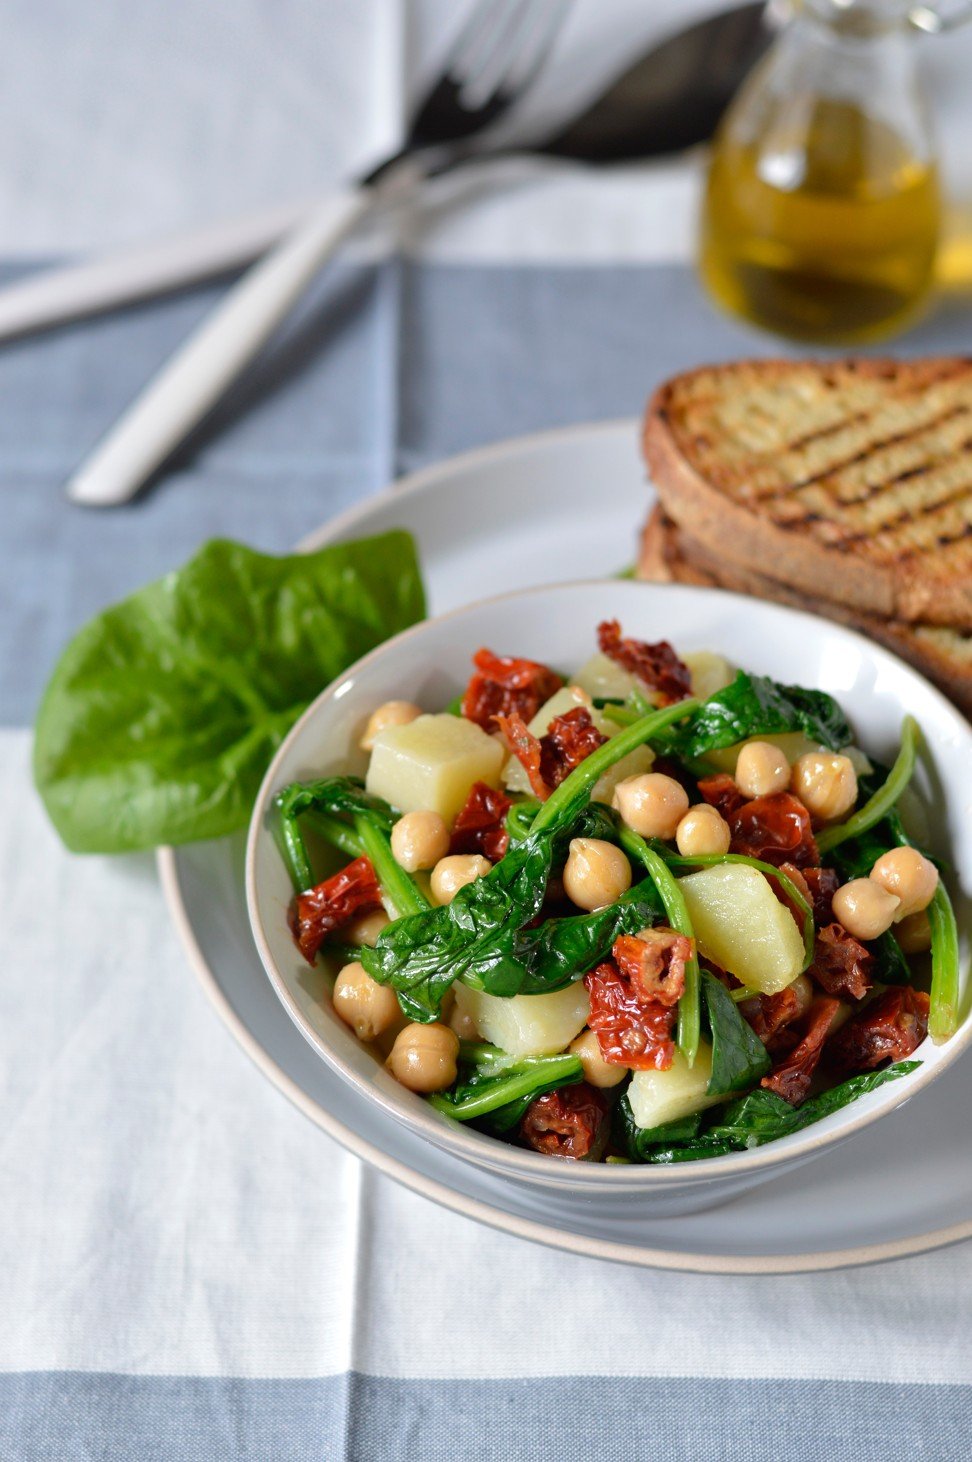 Spinach provides iron while chickpeas contain a good amount of calcium. Photo: Shutterstock